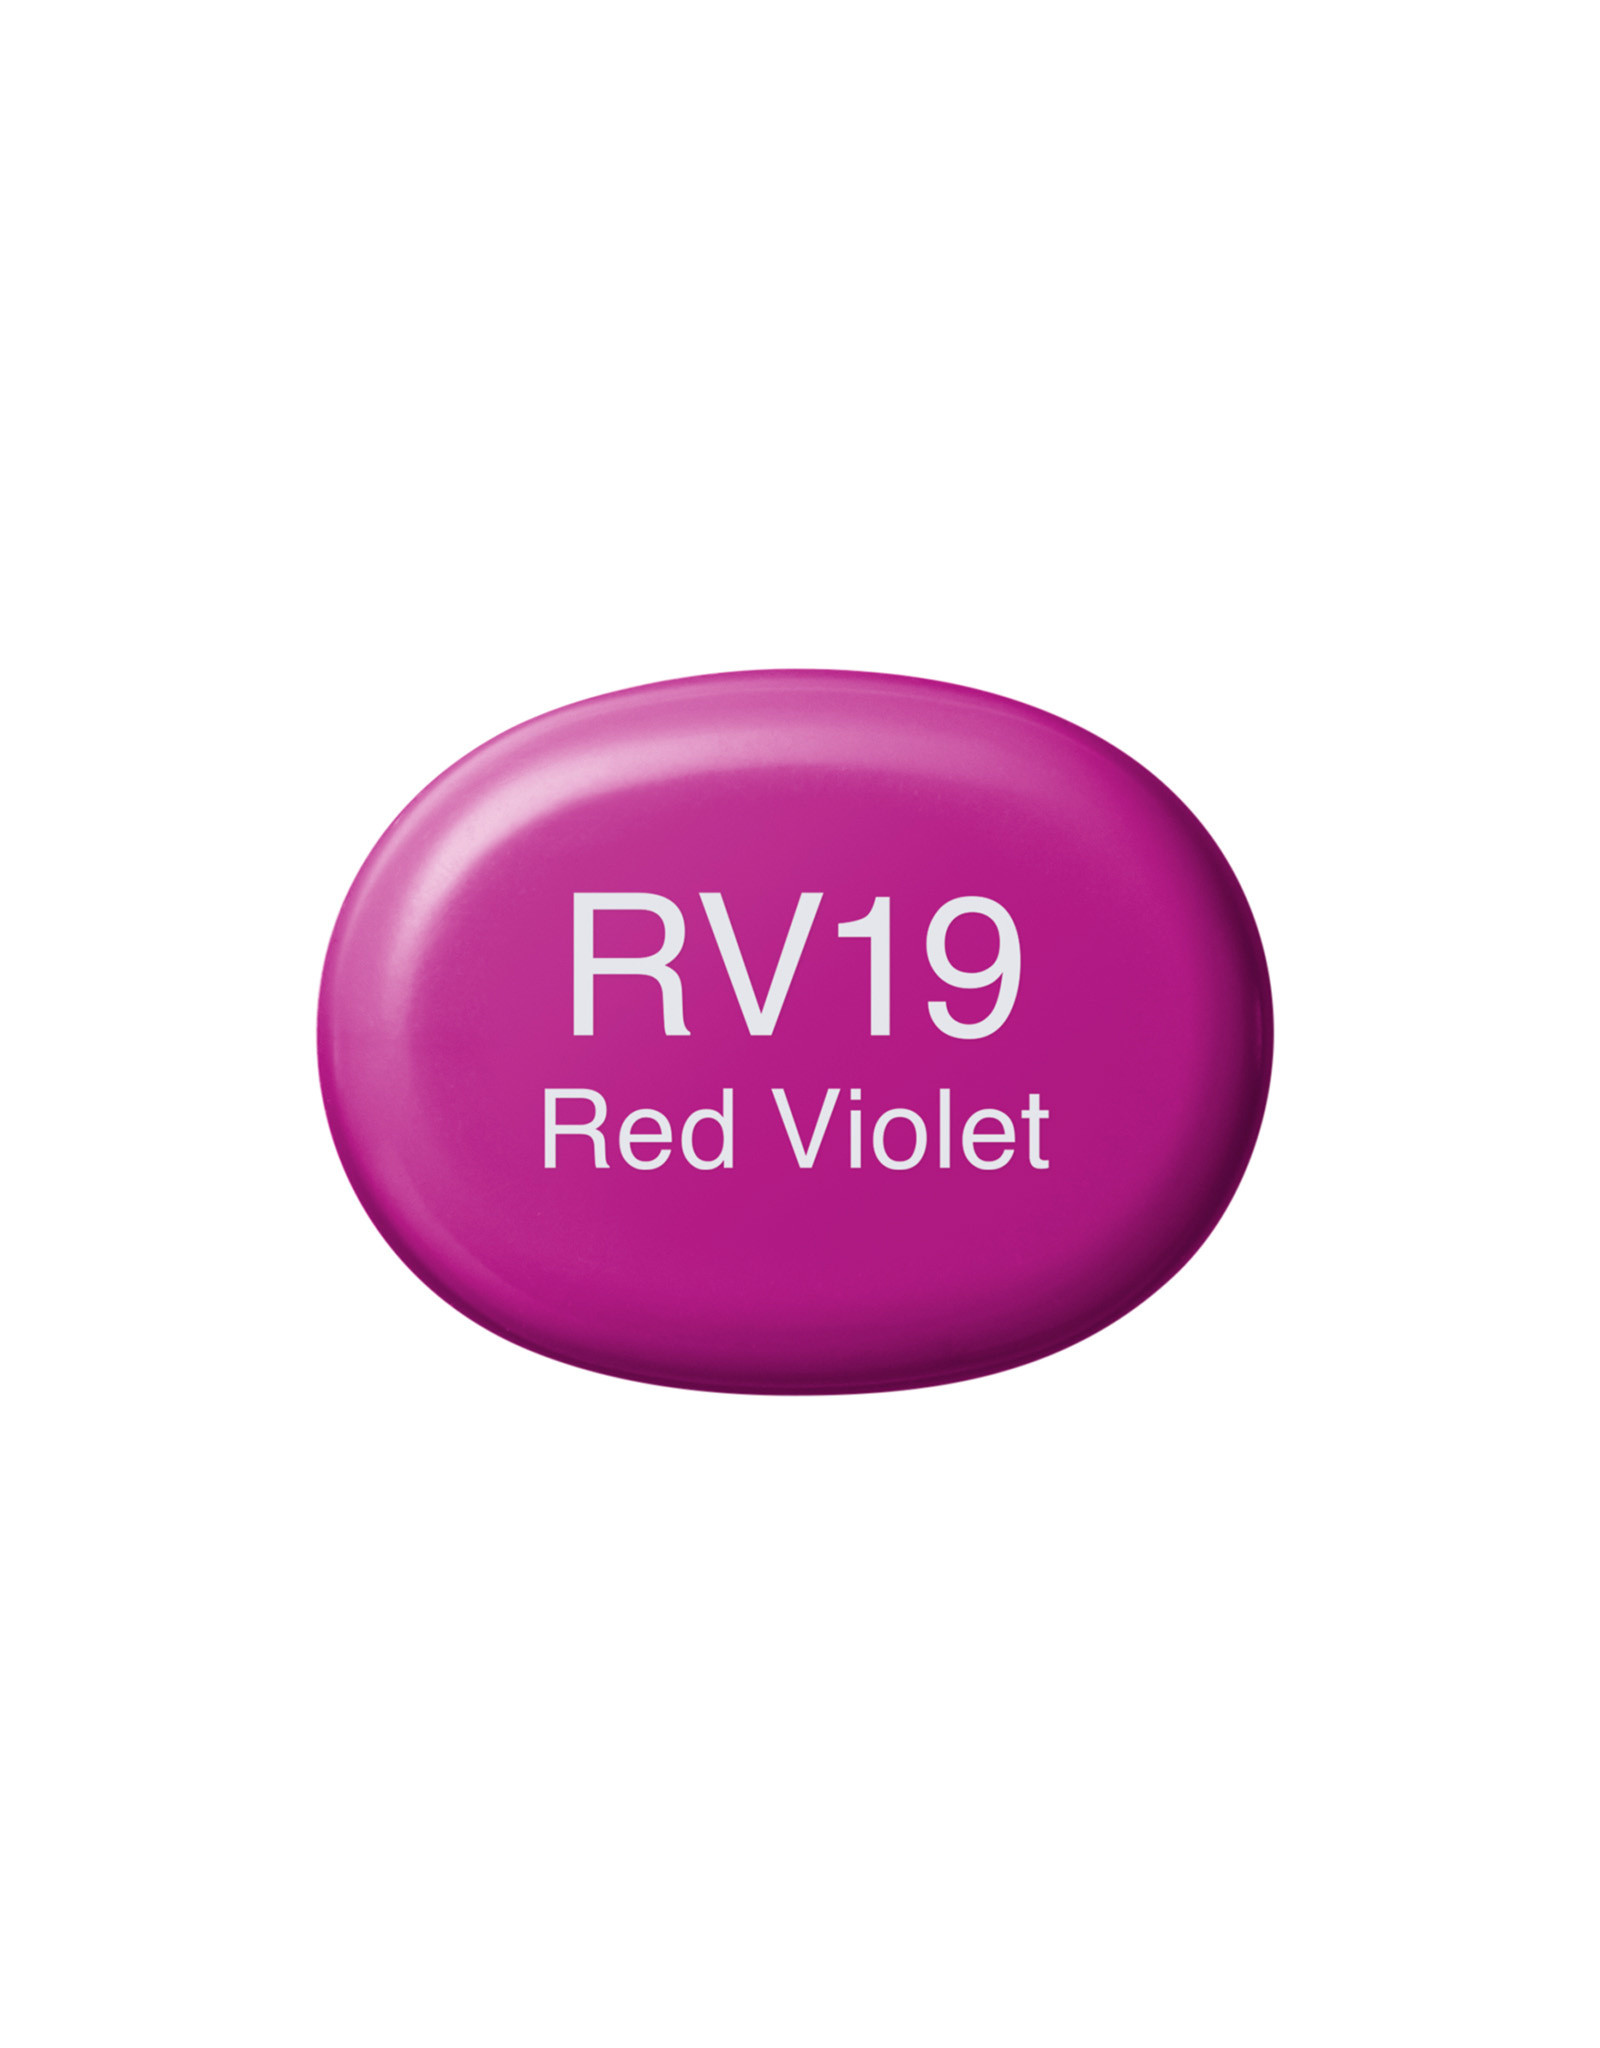 COPIC COPIC Sketch Marker RV19 Red Violet